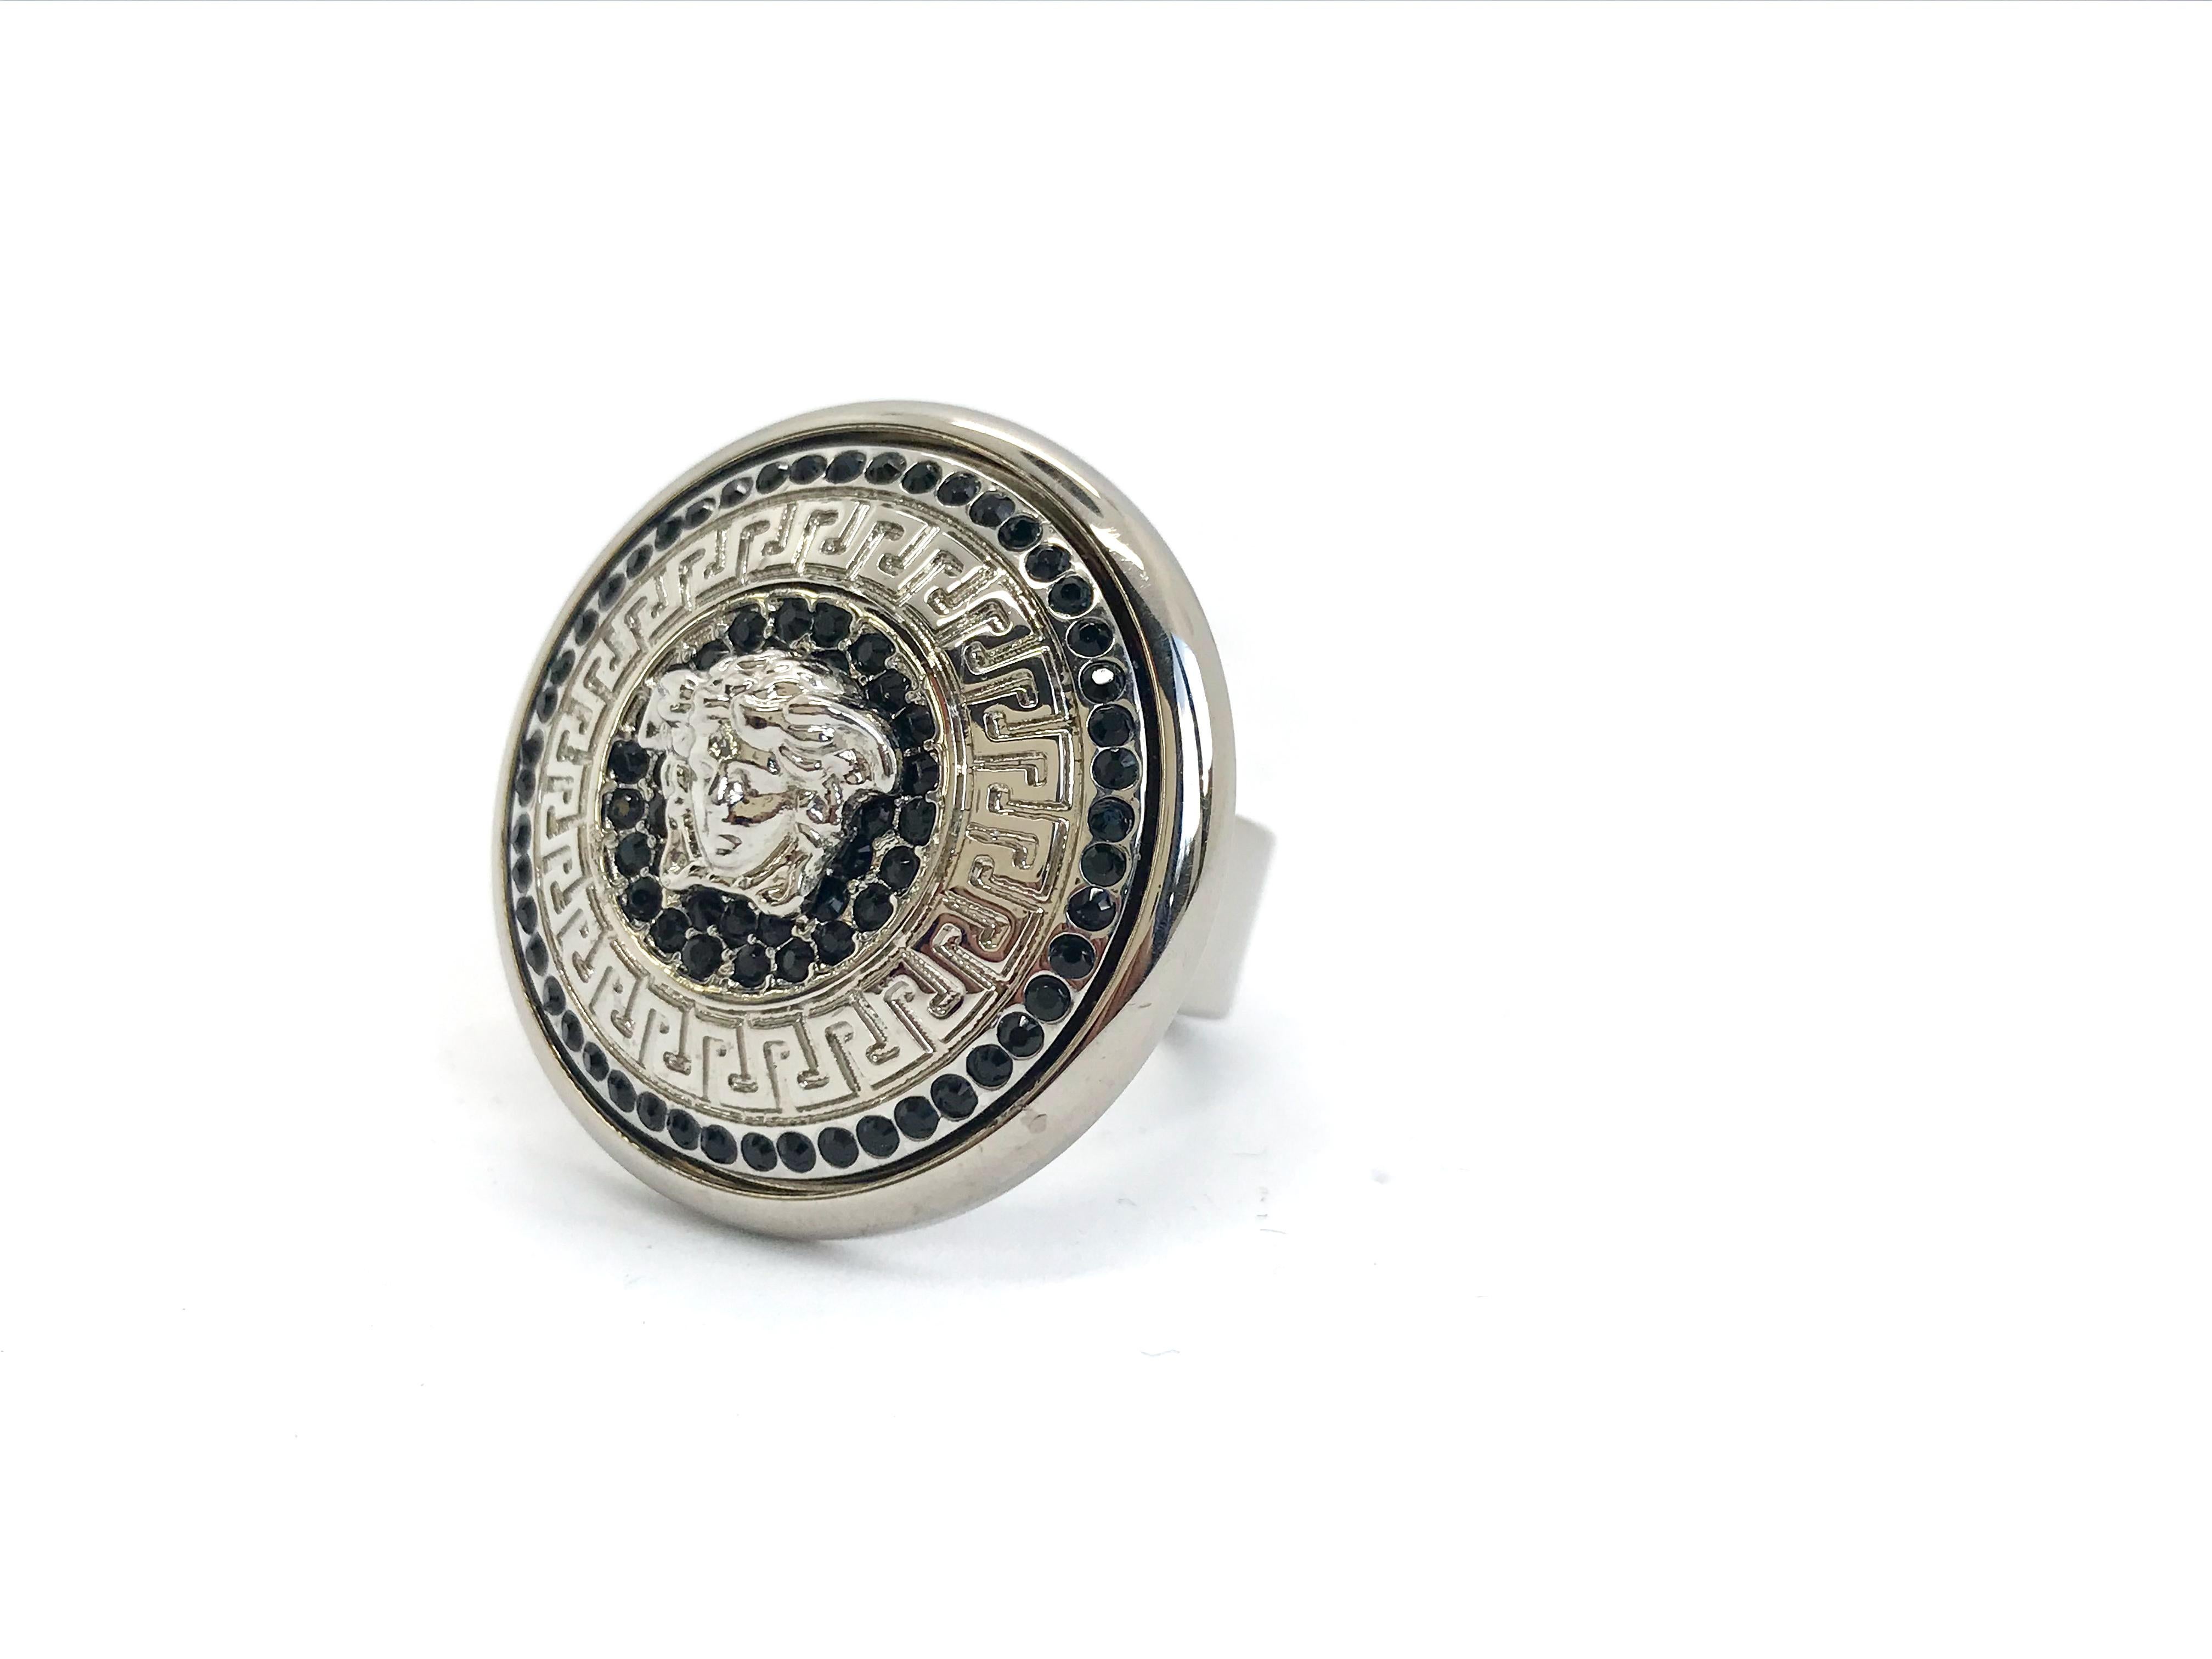 Amazing Gianni Versace Statement Ring.  Featuring the iconic Medusa head in centre.

Italian ring size 13 which equates to a US 6 1/2 or european 52.

Brand new with branded gift box, authenticity card & receipt (confidential details hidden).  

